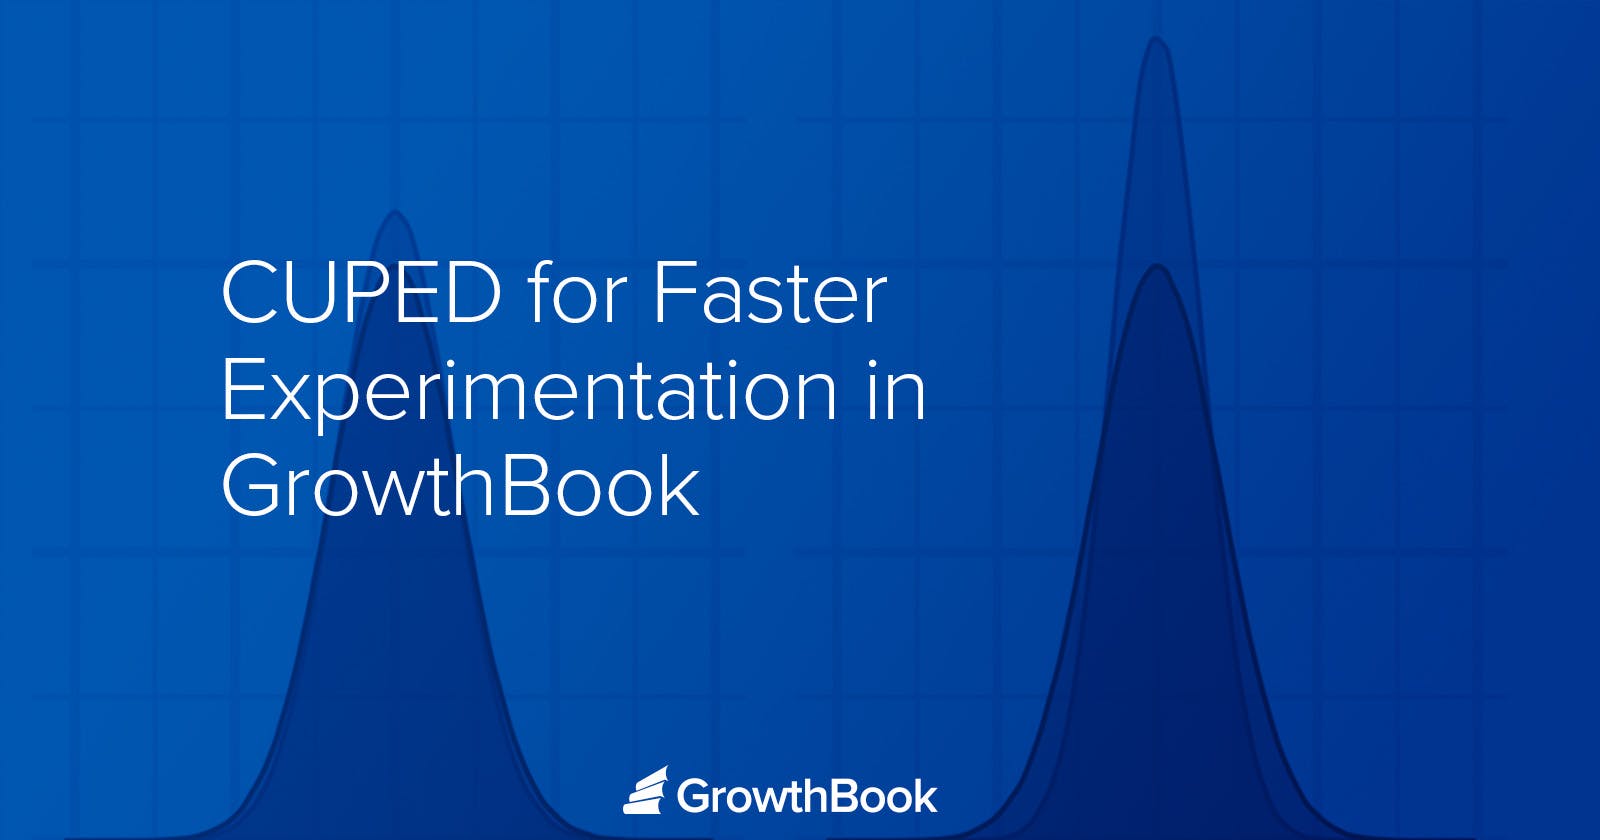 CUPED for Faster Experimentation in GrowthBook